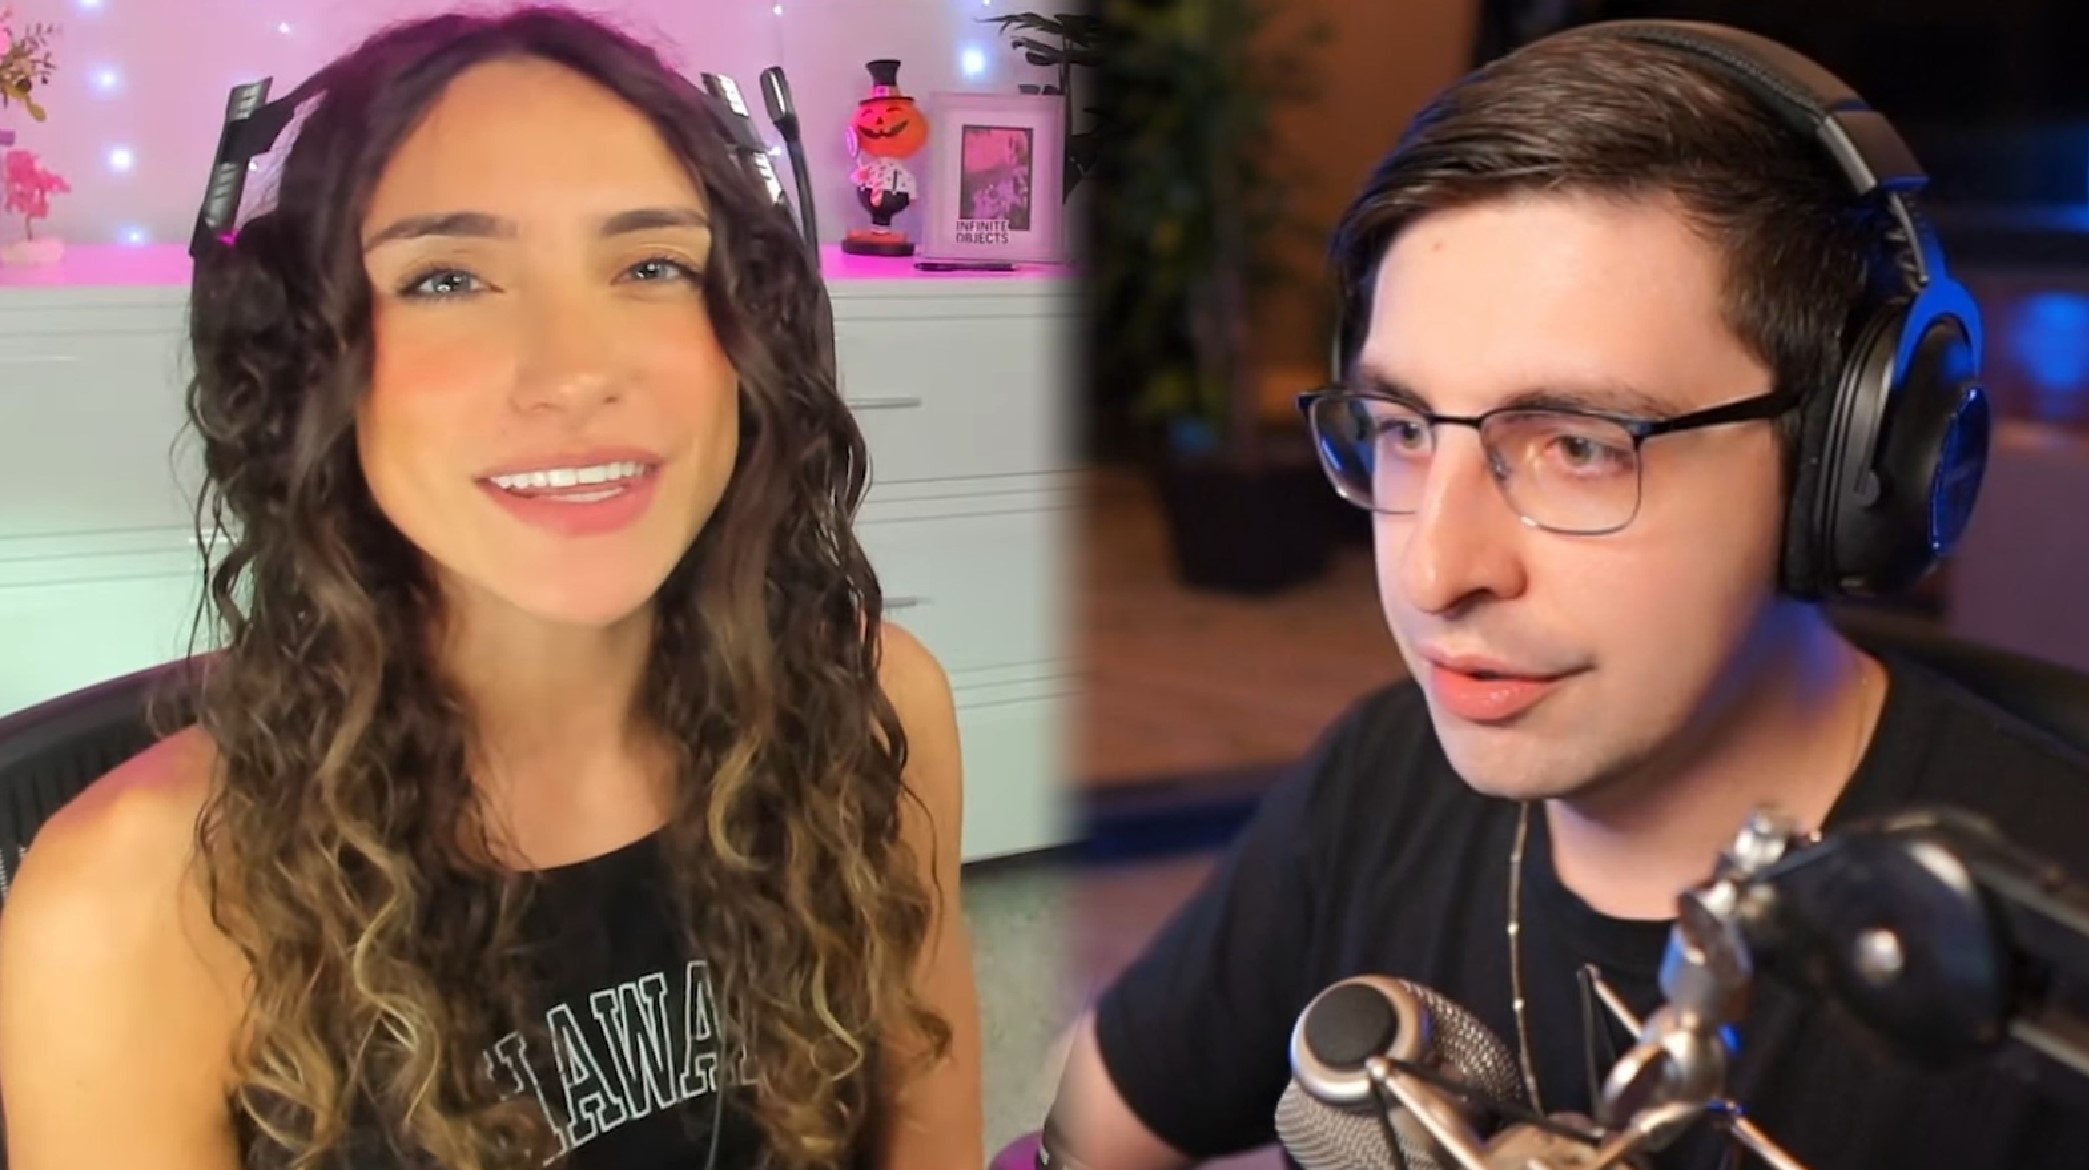 They dismissed it and lied: Streamer Nadia, Who's Been Accused of